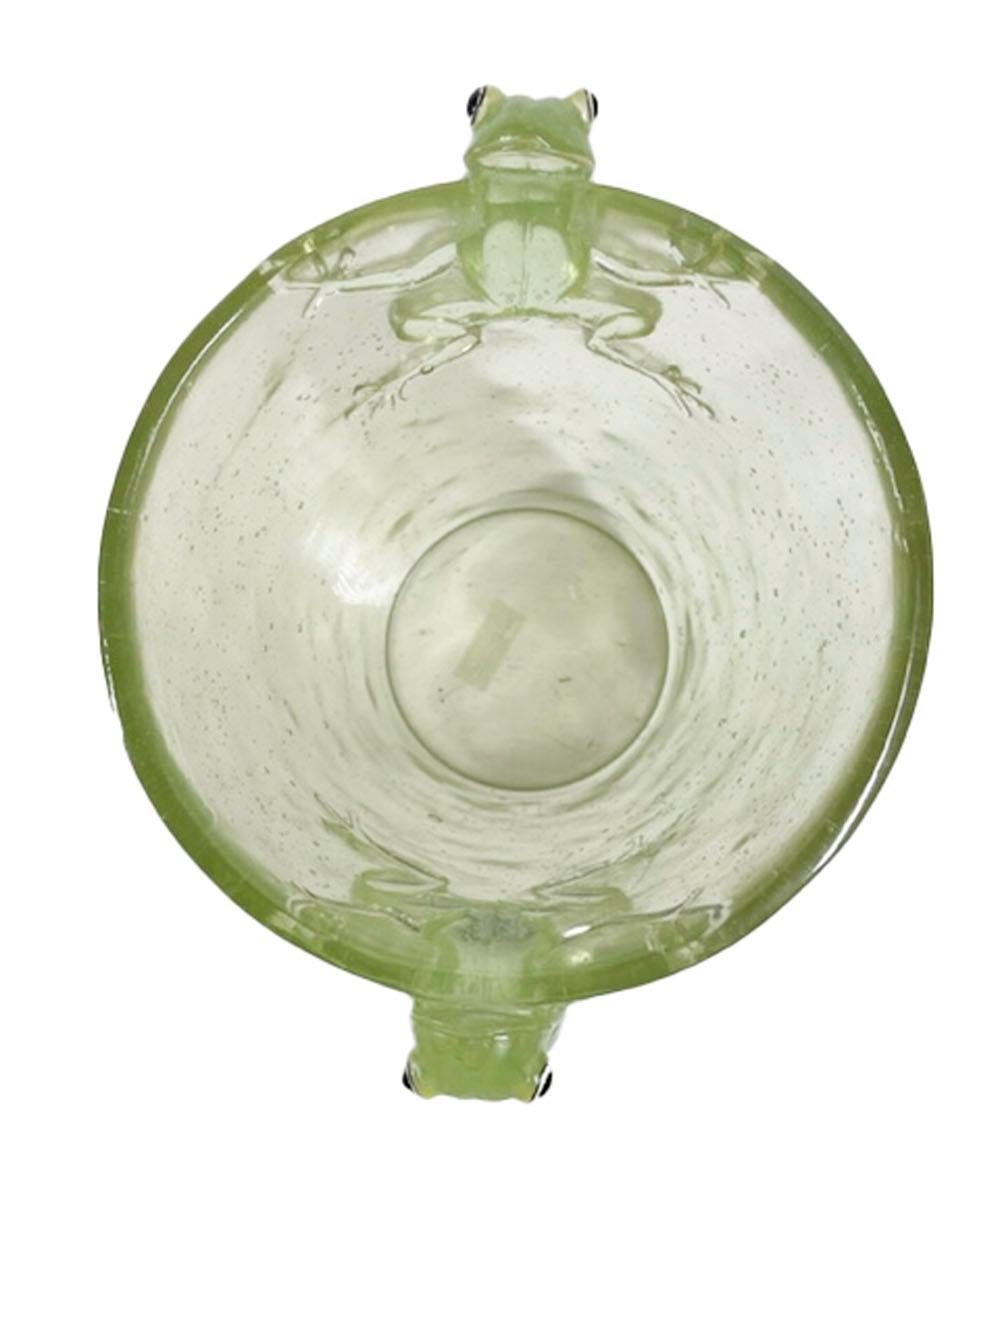 Mid-Century Modern translucent and bubbly green Lucite ice bucket / wine cooler of tapered form with tree frog handles climbing above the rim.